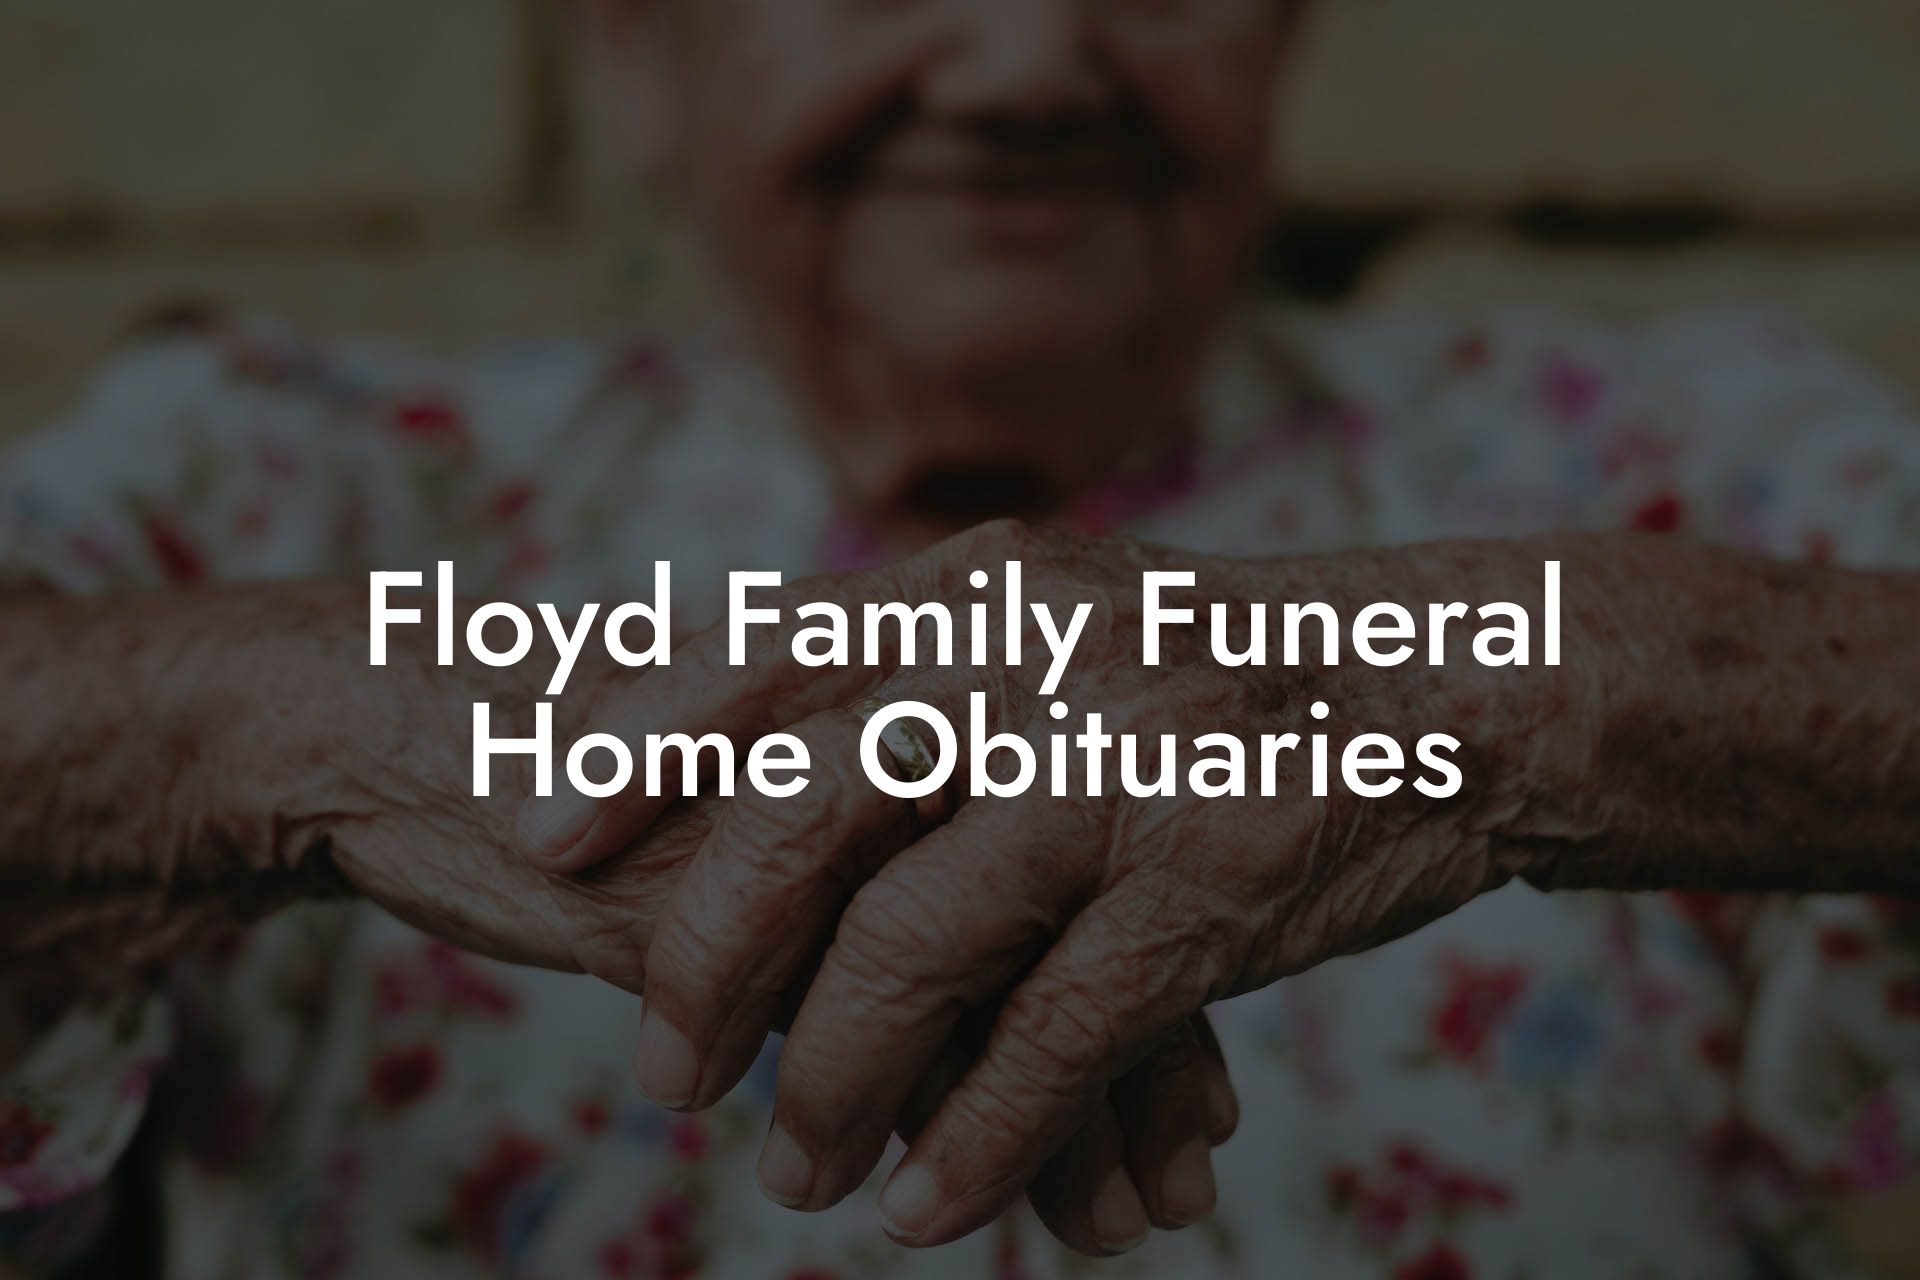 Floyd Family Funeral Home Obituaries